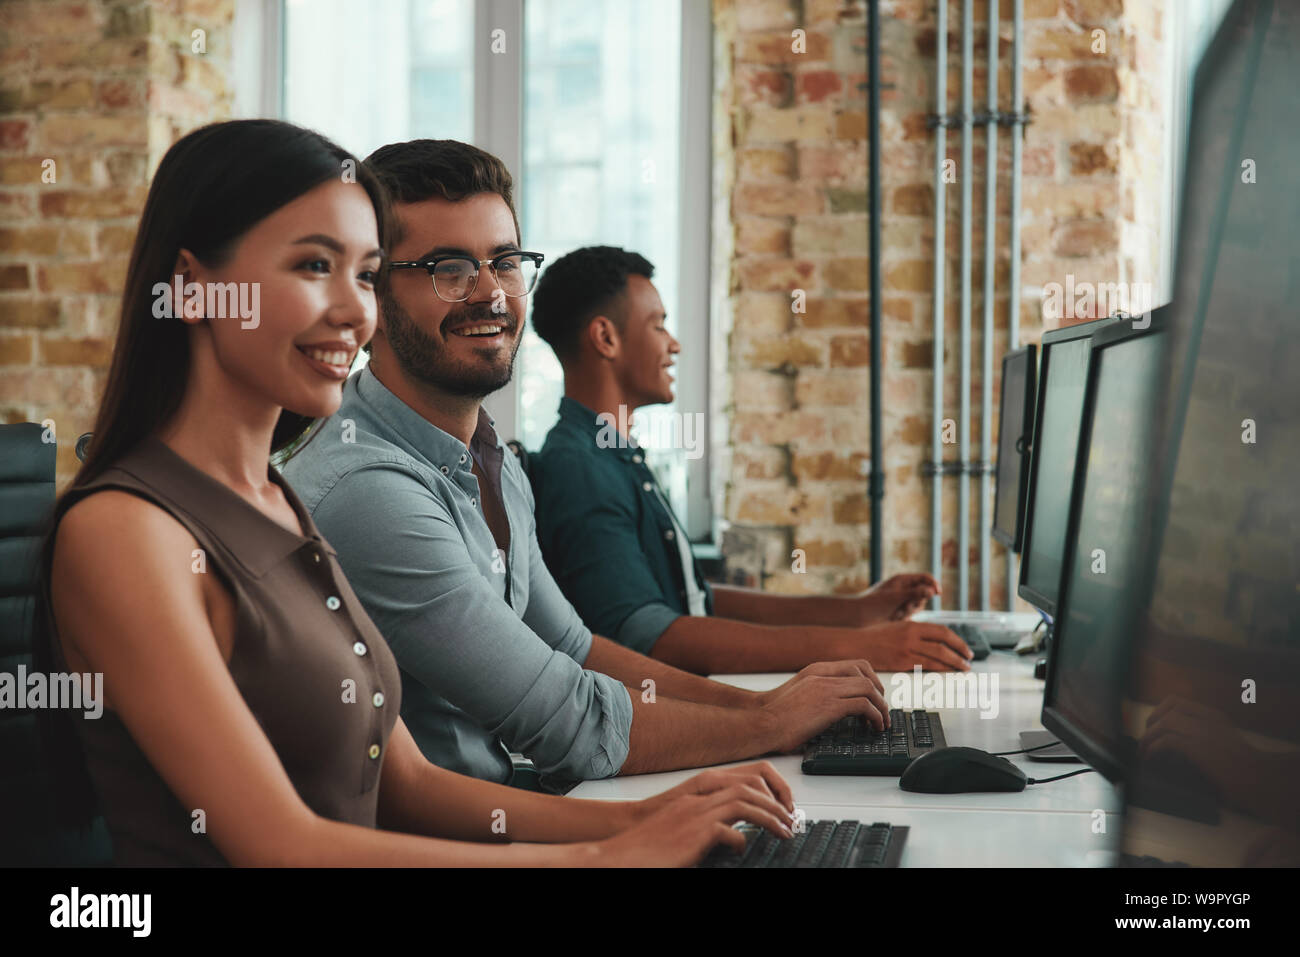 Happy to work together. Group of cheerful young employees working on computers and smiling while sitting in modern open space. Job concept. Business people. Workplace Stock Photo